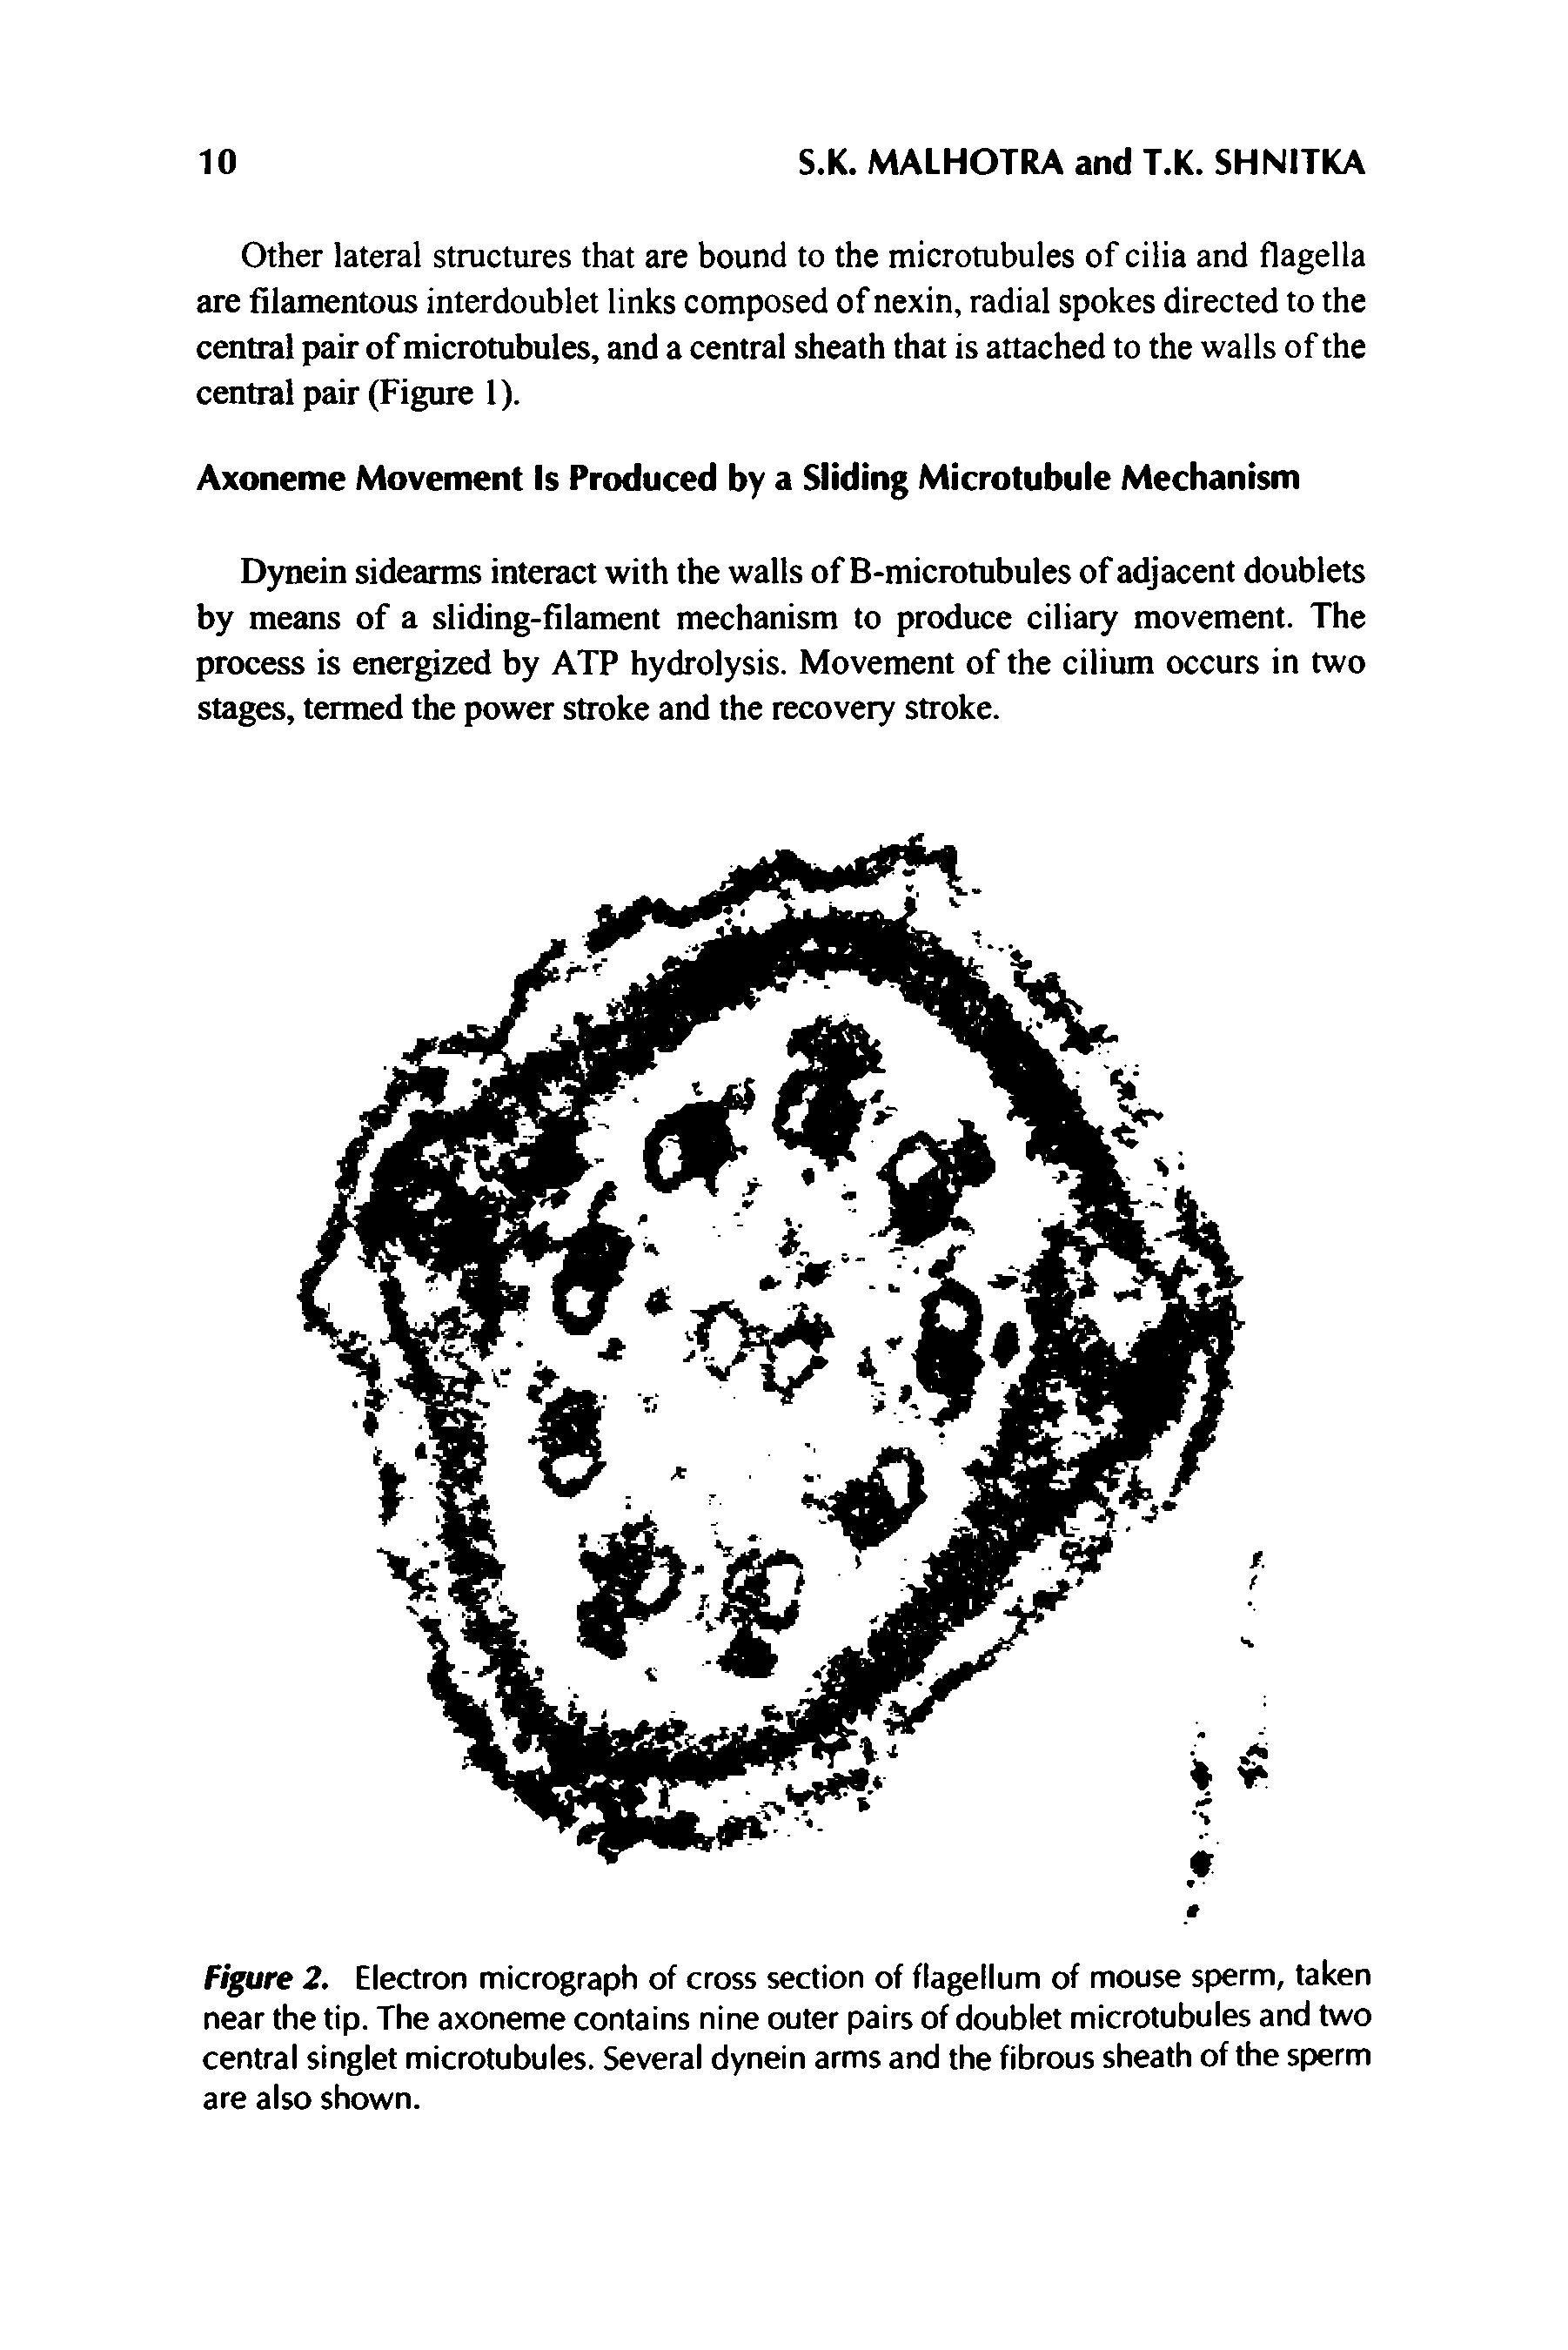 Figure 2. Electron micrograph of cross section of flagellum of mouse sperm, taken near the tip. The axoneme contains nine outer pairs of doublet microtubules and two central singlet microtubules. Several dynein arms and the fibrous sheath of the sperm are also shown.